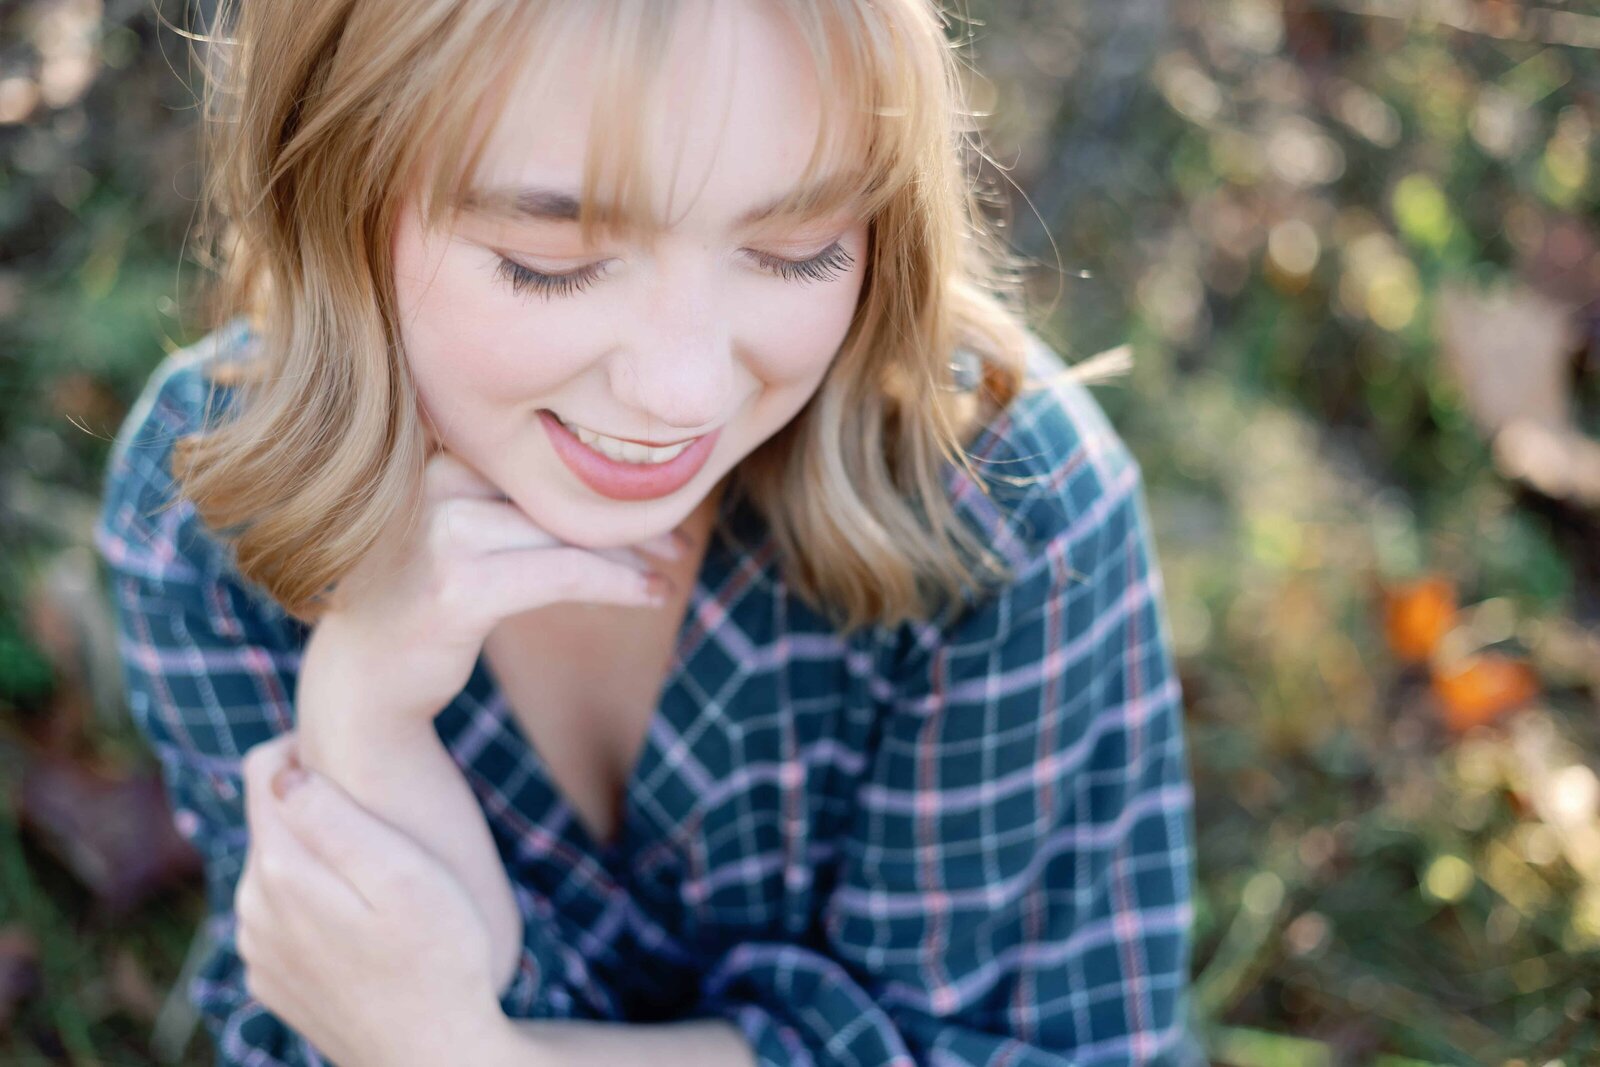 Photo taken by Indianapolis Photographer Monette Wagner of high school senior girl in blue plaid top laughing